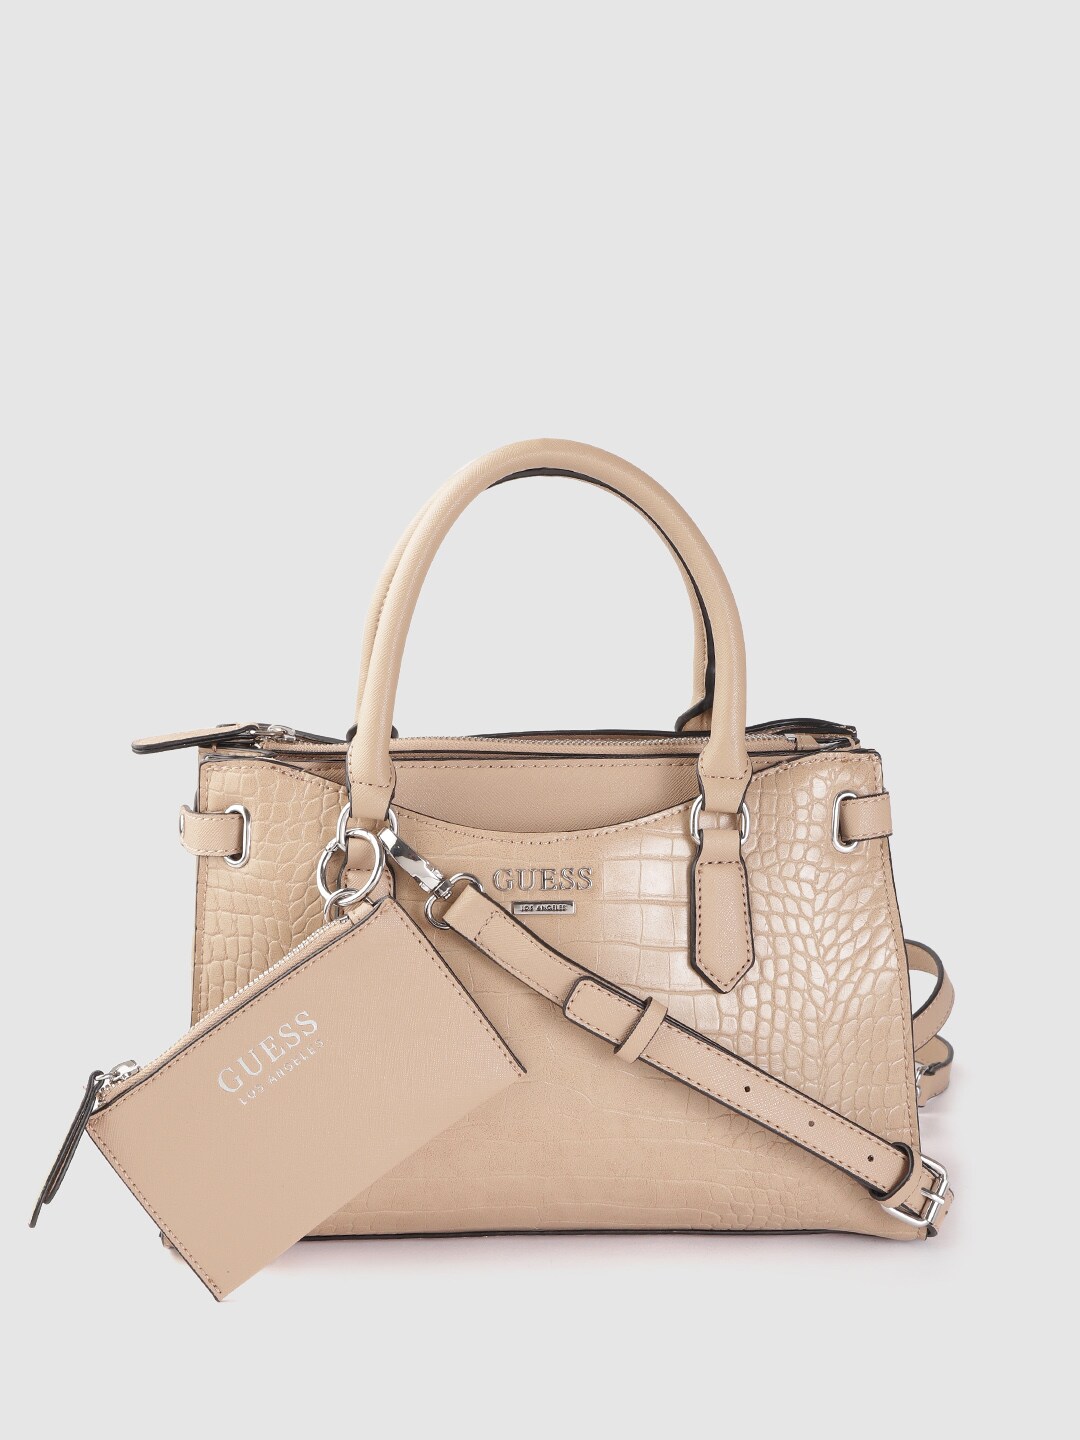 GUESS Beige Snakeskin Textured Handheld Bag with Detachable Sling Strap & Pouch Price in India